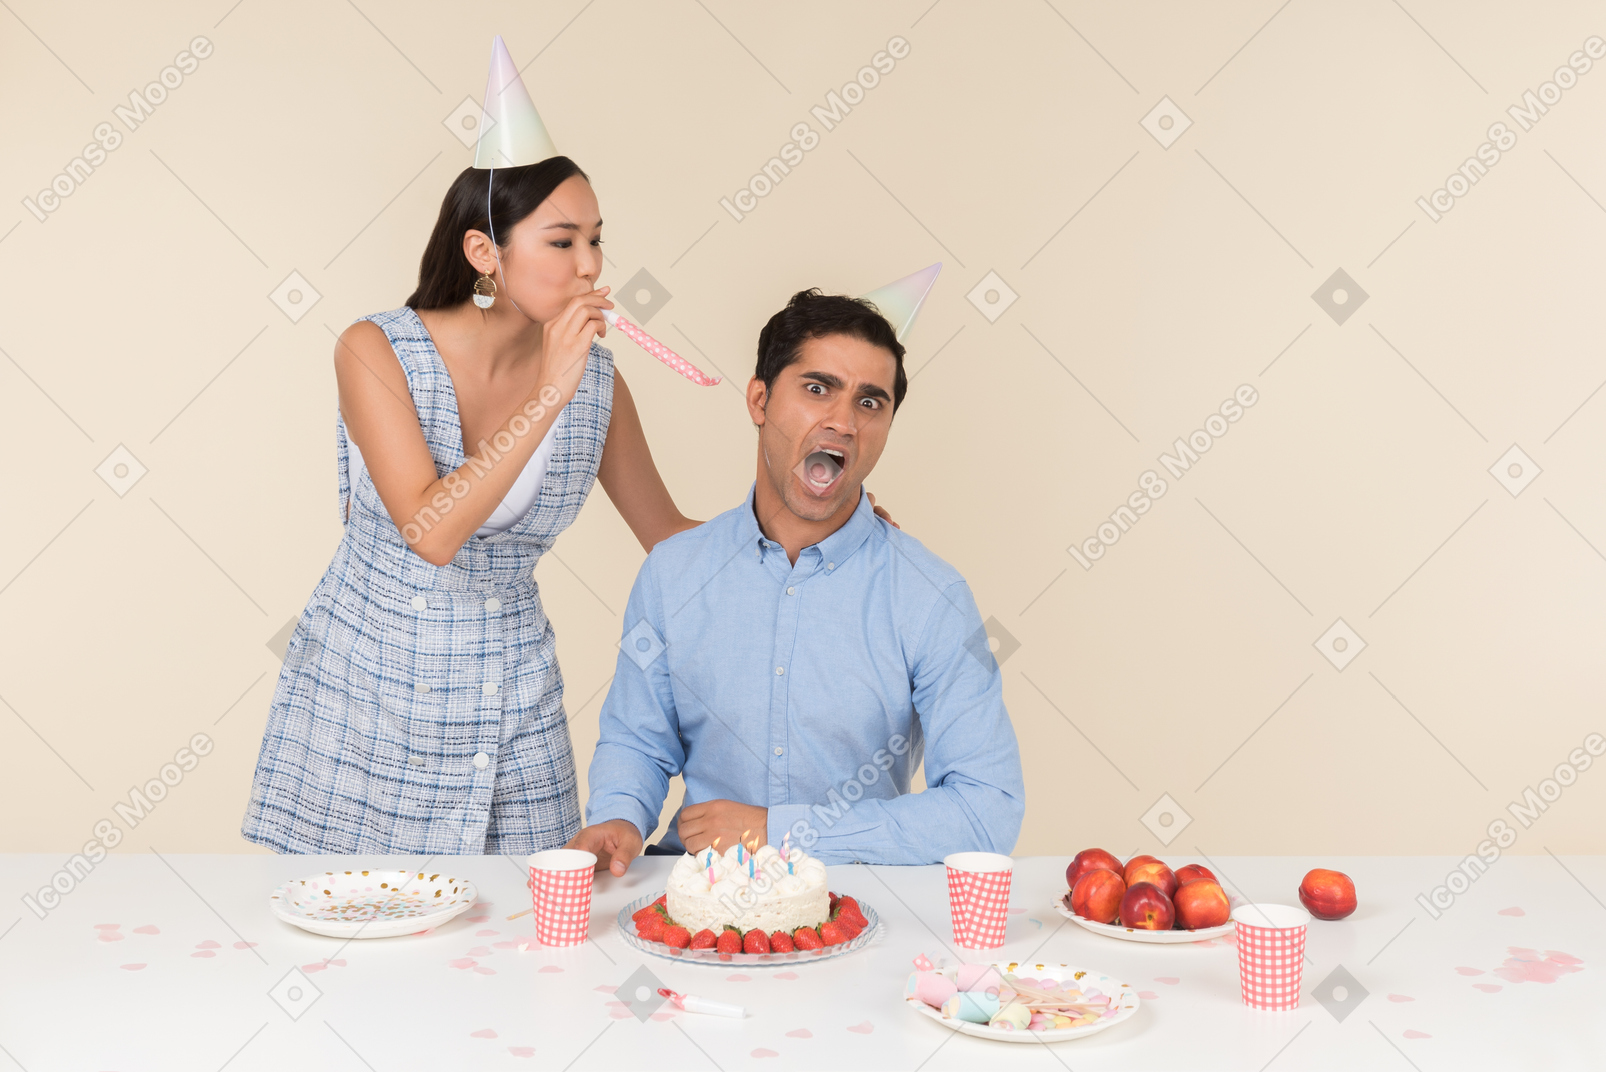 Young woman whistling right into her partner's ear